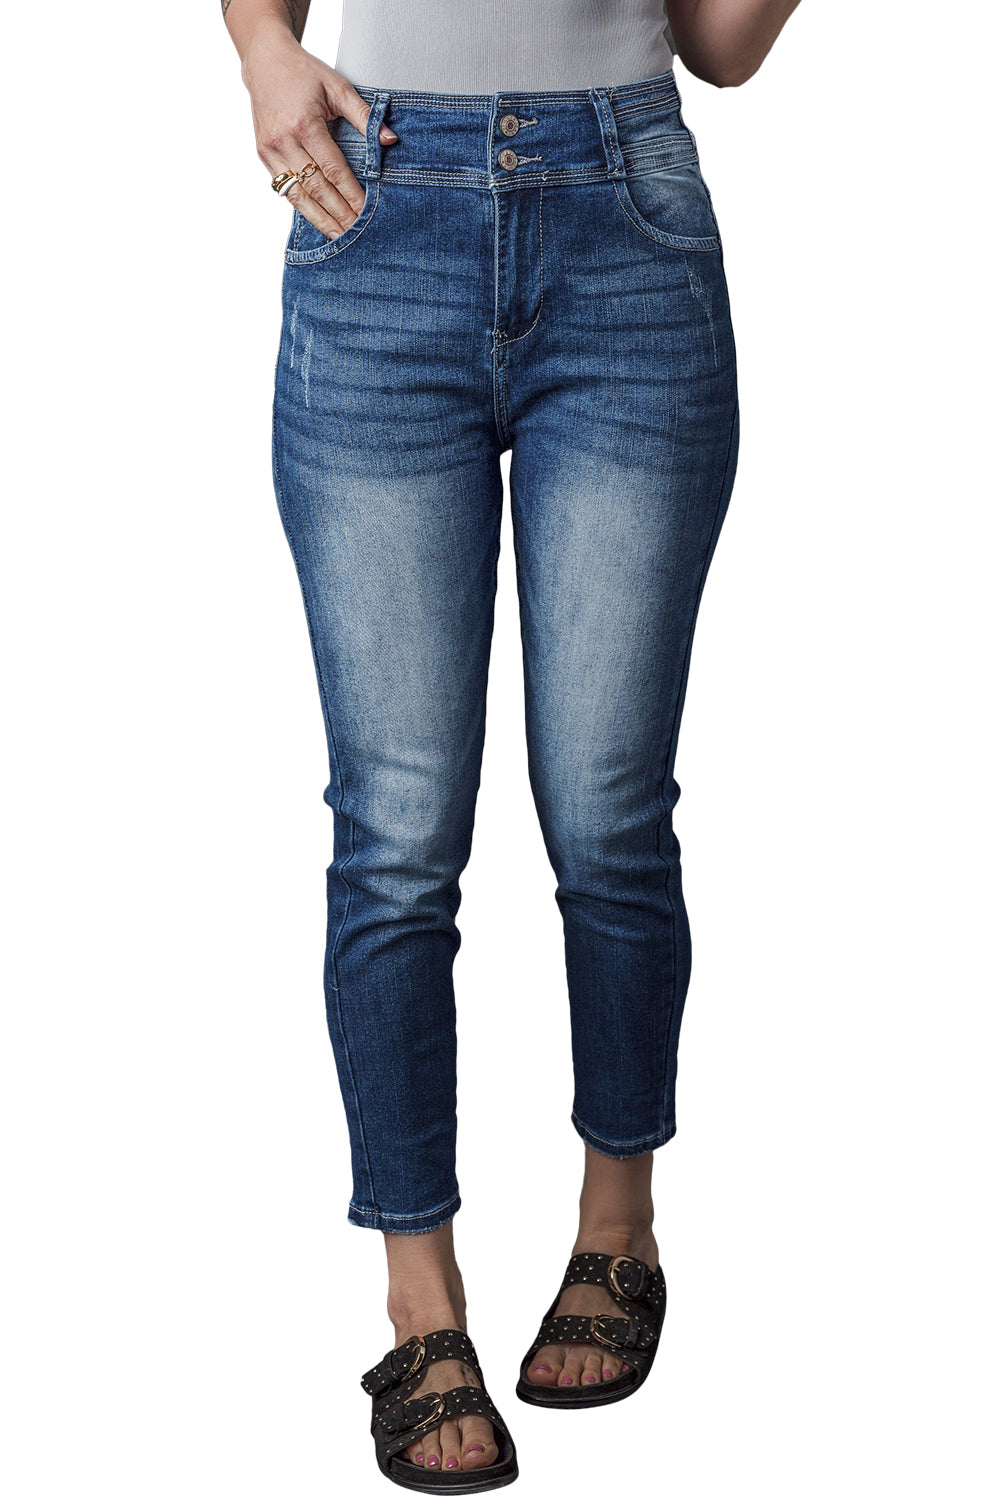 - Blue Vintage Washed Two-button High Waist Skinny Jeans - women's jeans at TFC&H Co.